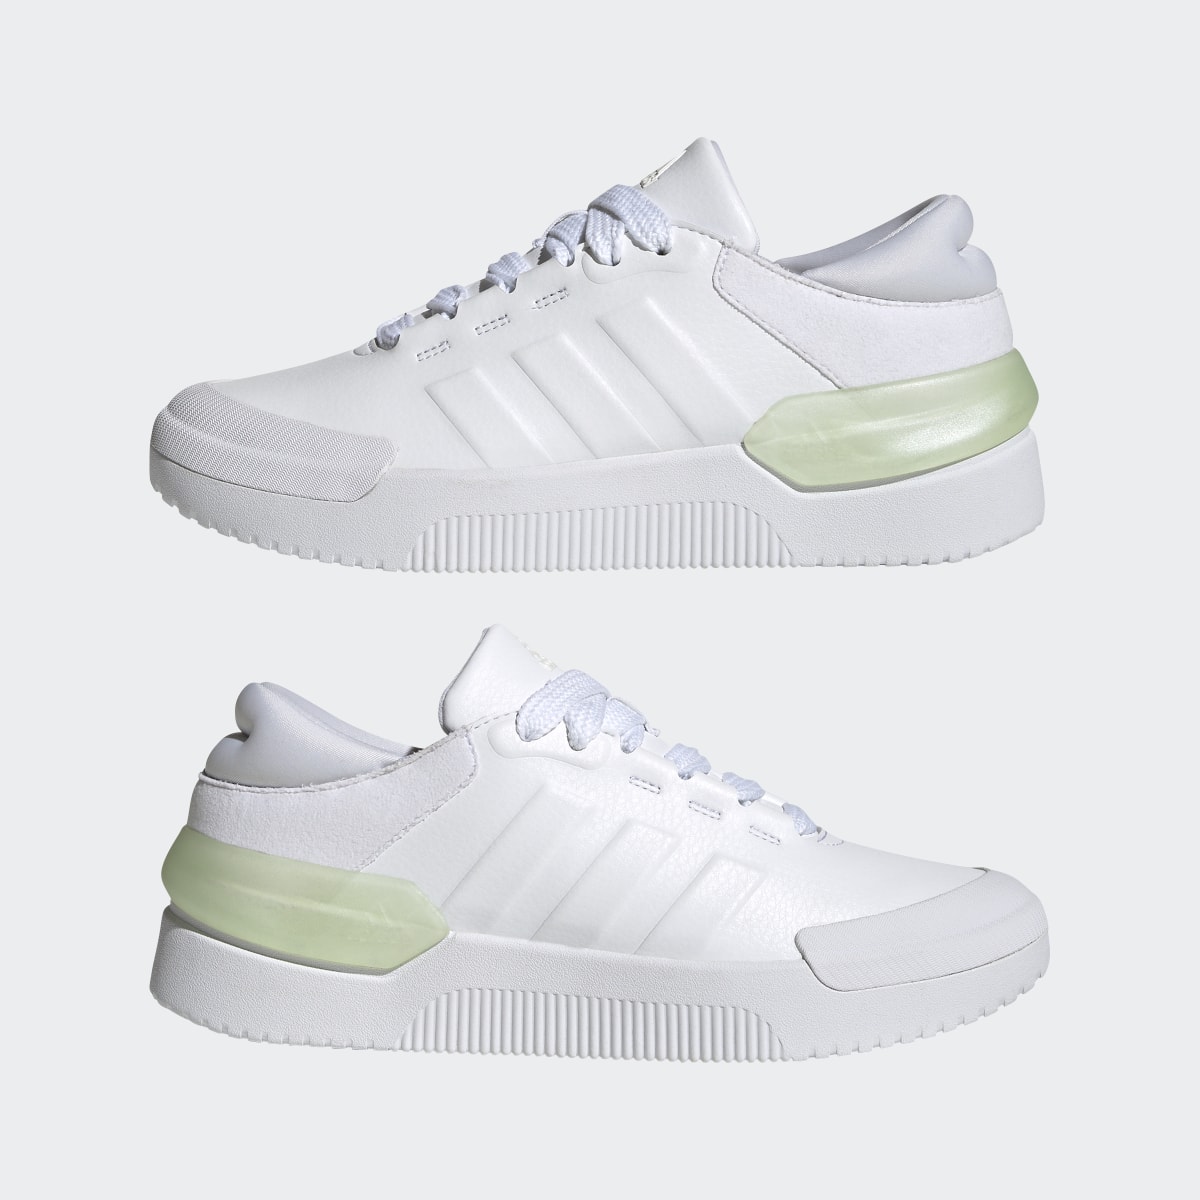 Adidas Court Funk Shoes. 8